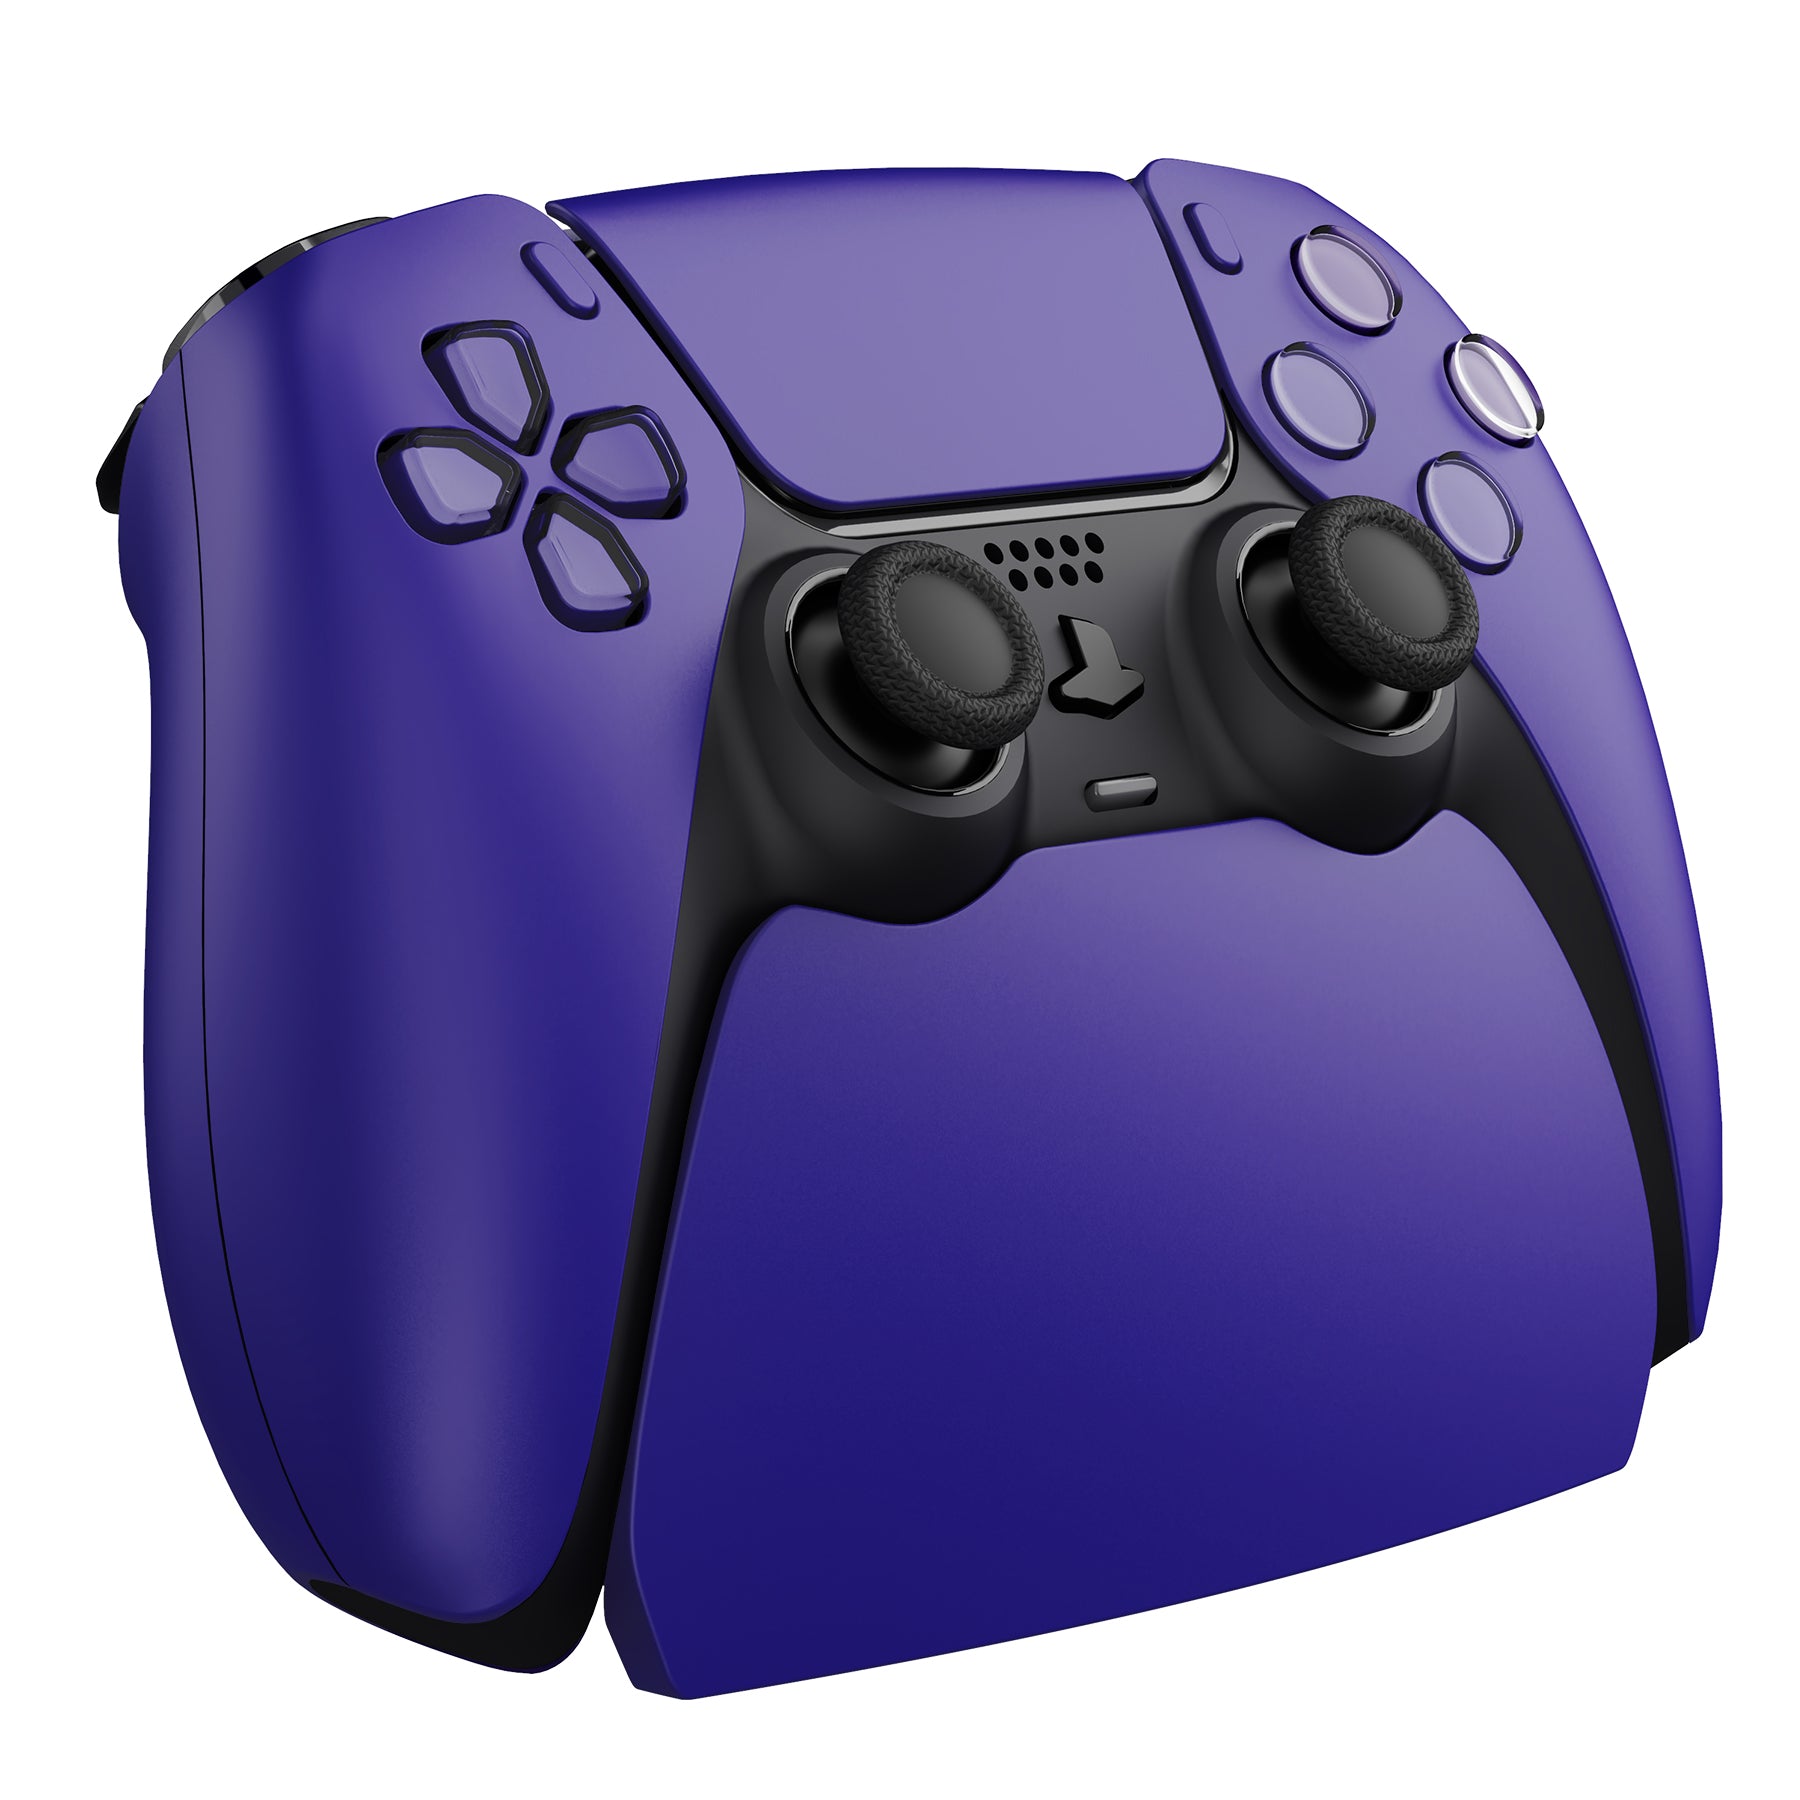 PlayVital Galactic Purple Controller Display Stand for PS5, Gamepad Accessories Desk Holder for PS5 Controller with Rubber Pads - PFPJ082 PlayVital